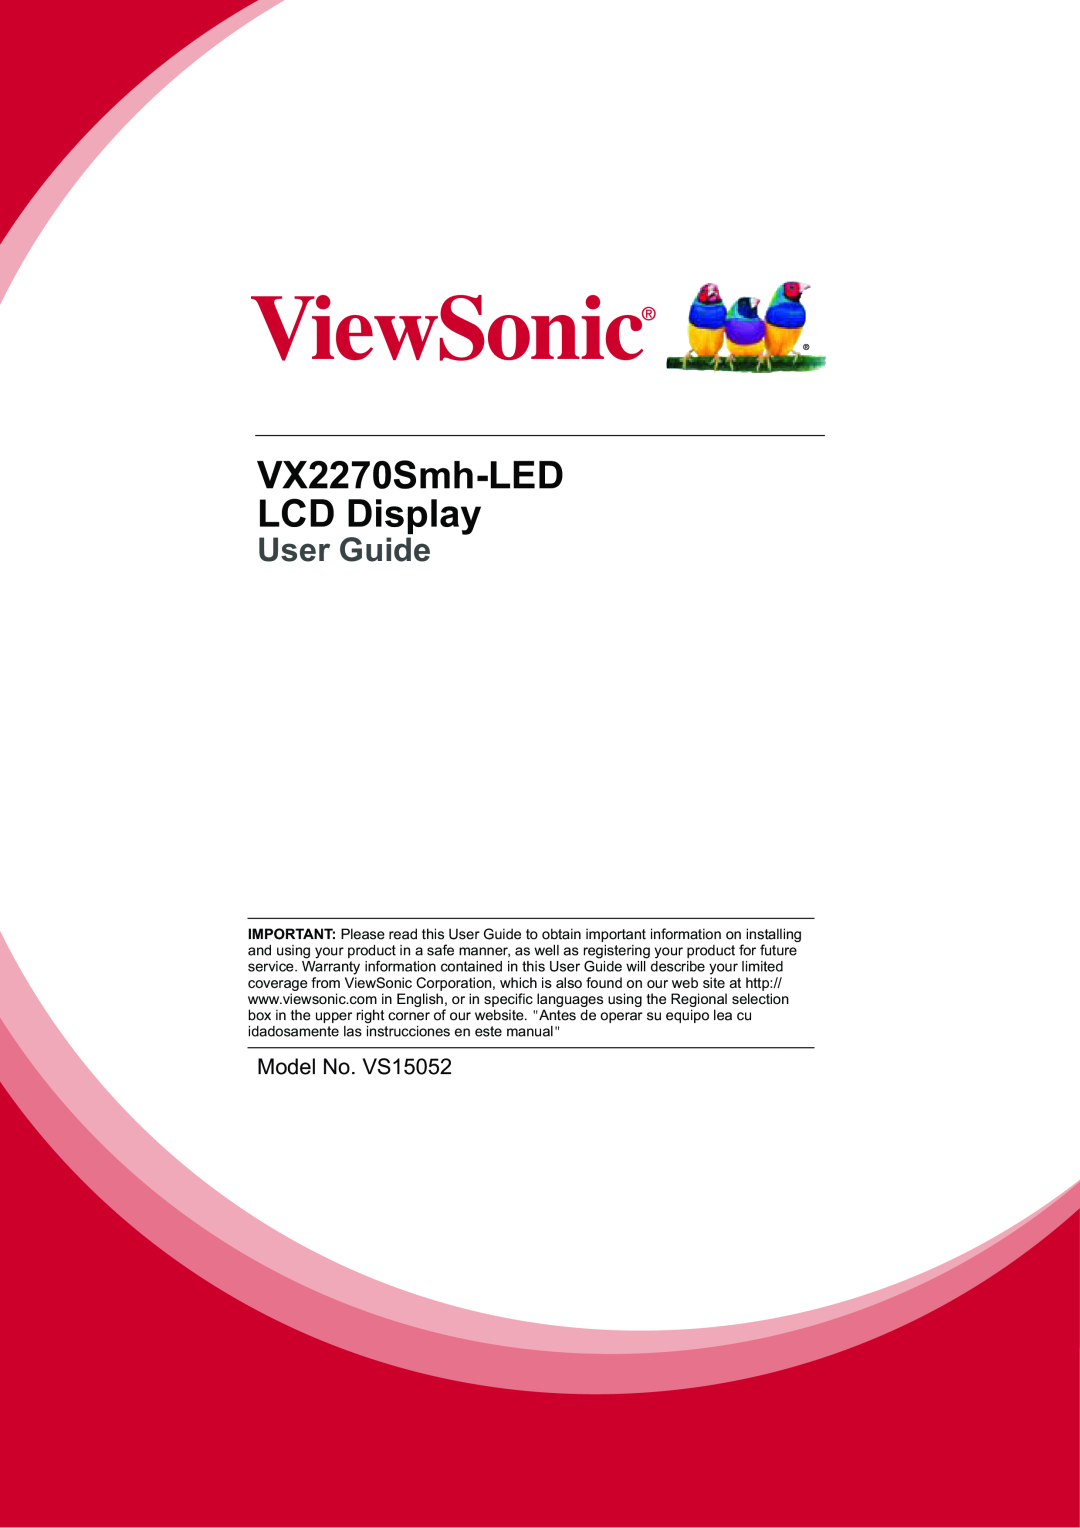 ViewSonic warranty VX2270Smh-LED LCD Display, User Guide 